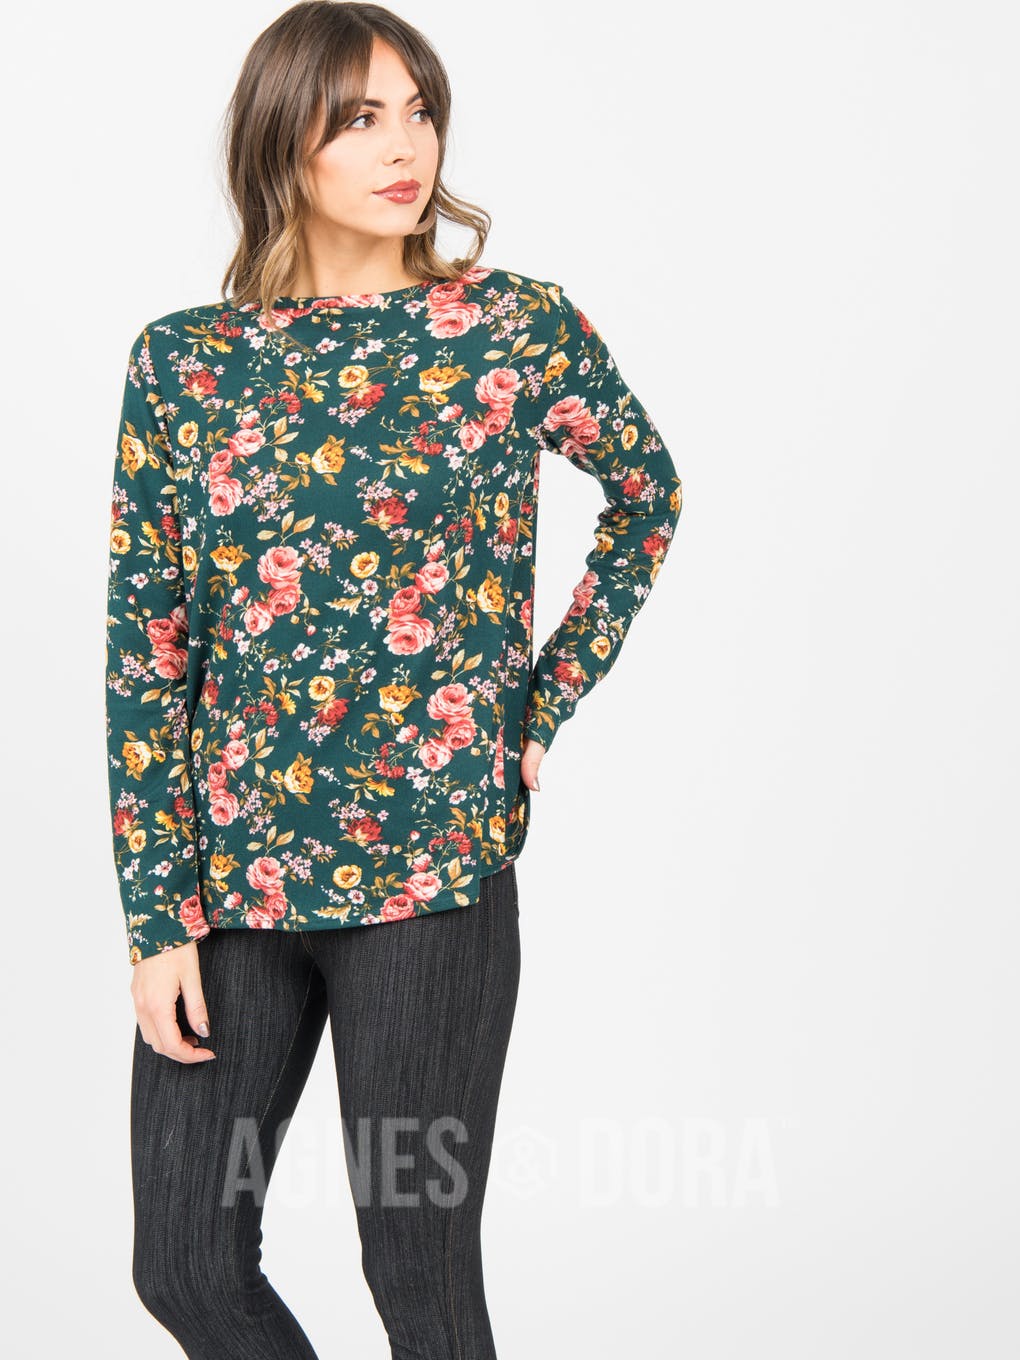 Cross Over Sweater Teal Floral